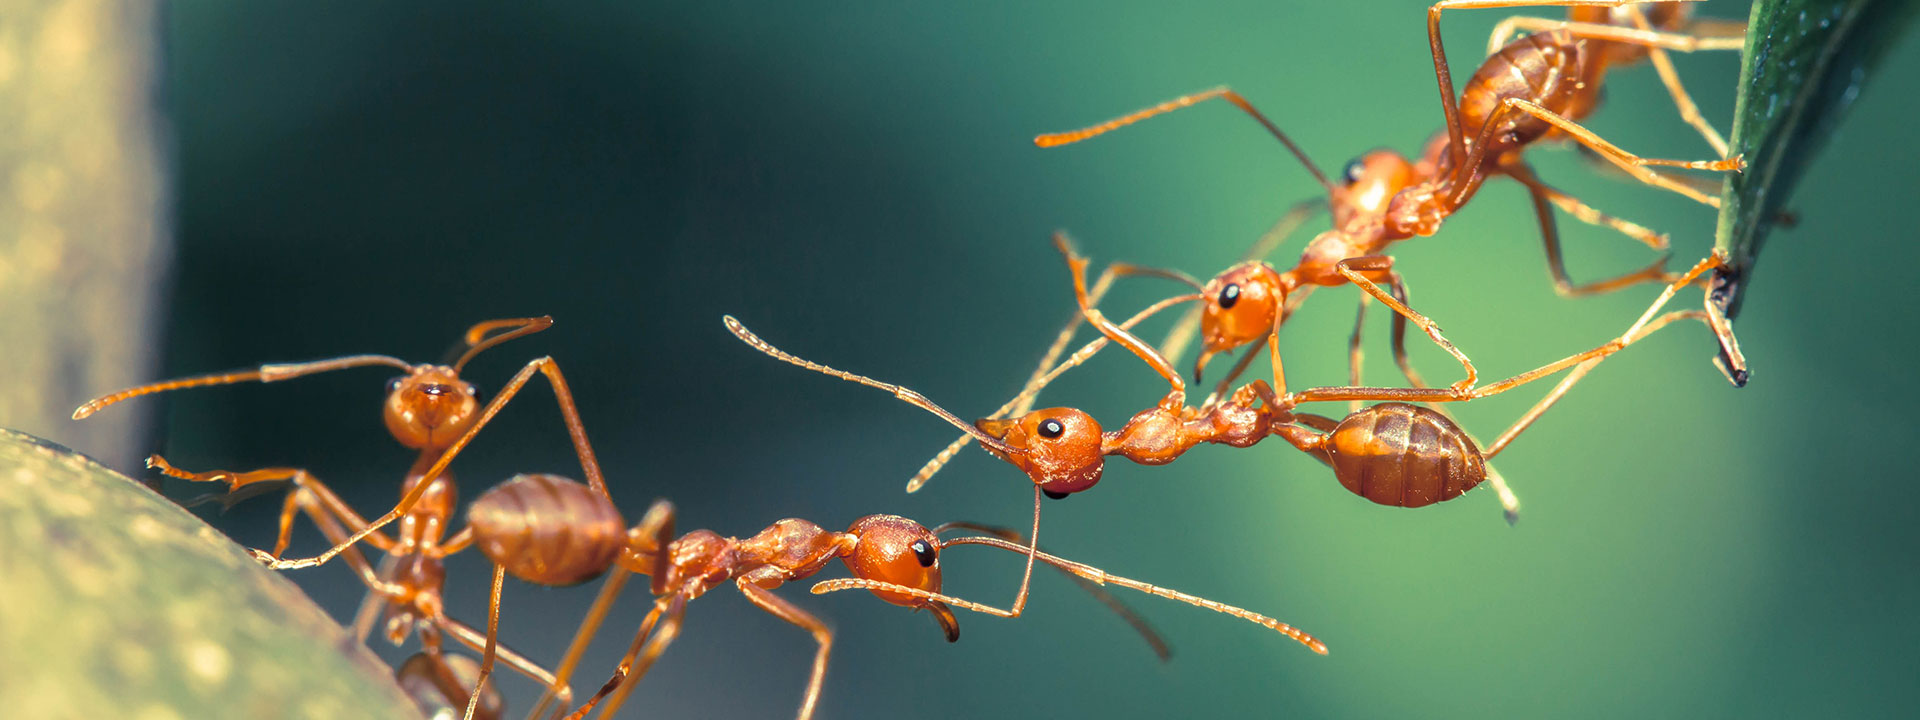 Closeup of five ants climbing from one leaf to another.